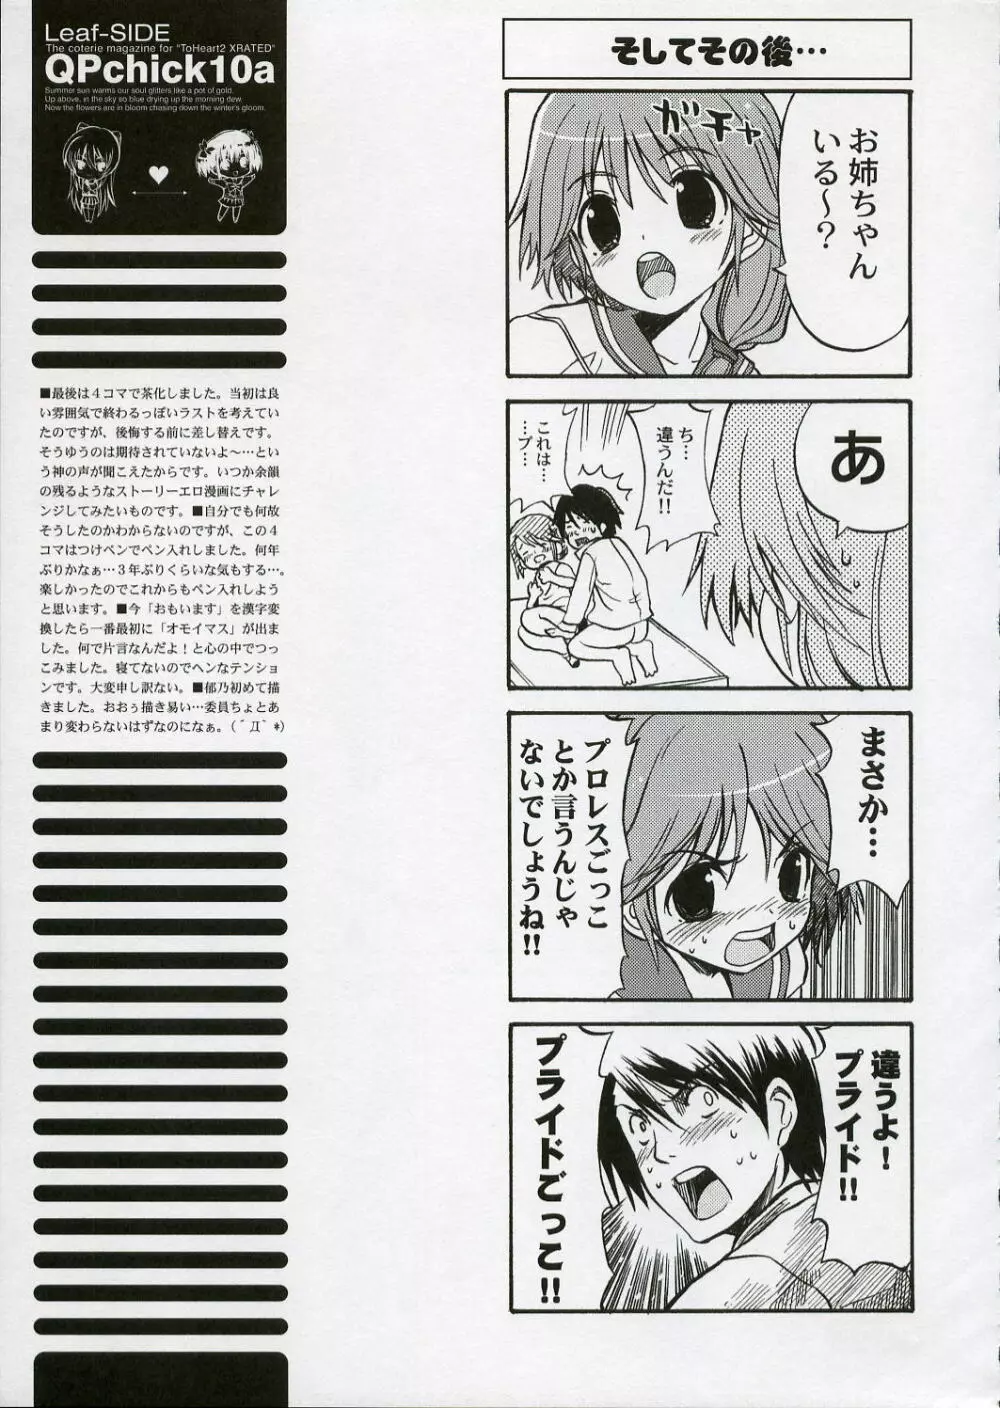 [QP:flapper (ぴめこ、トメ太)] QPchick10a Leaf-SIDE -Re:Re:CHERRY- (トゥハート2) [2006年4月] Page.42